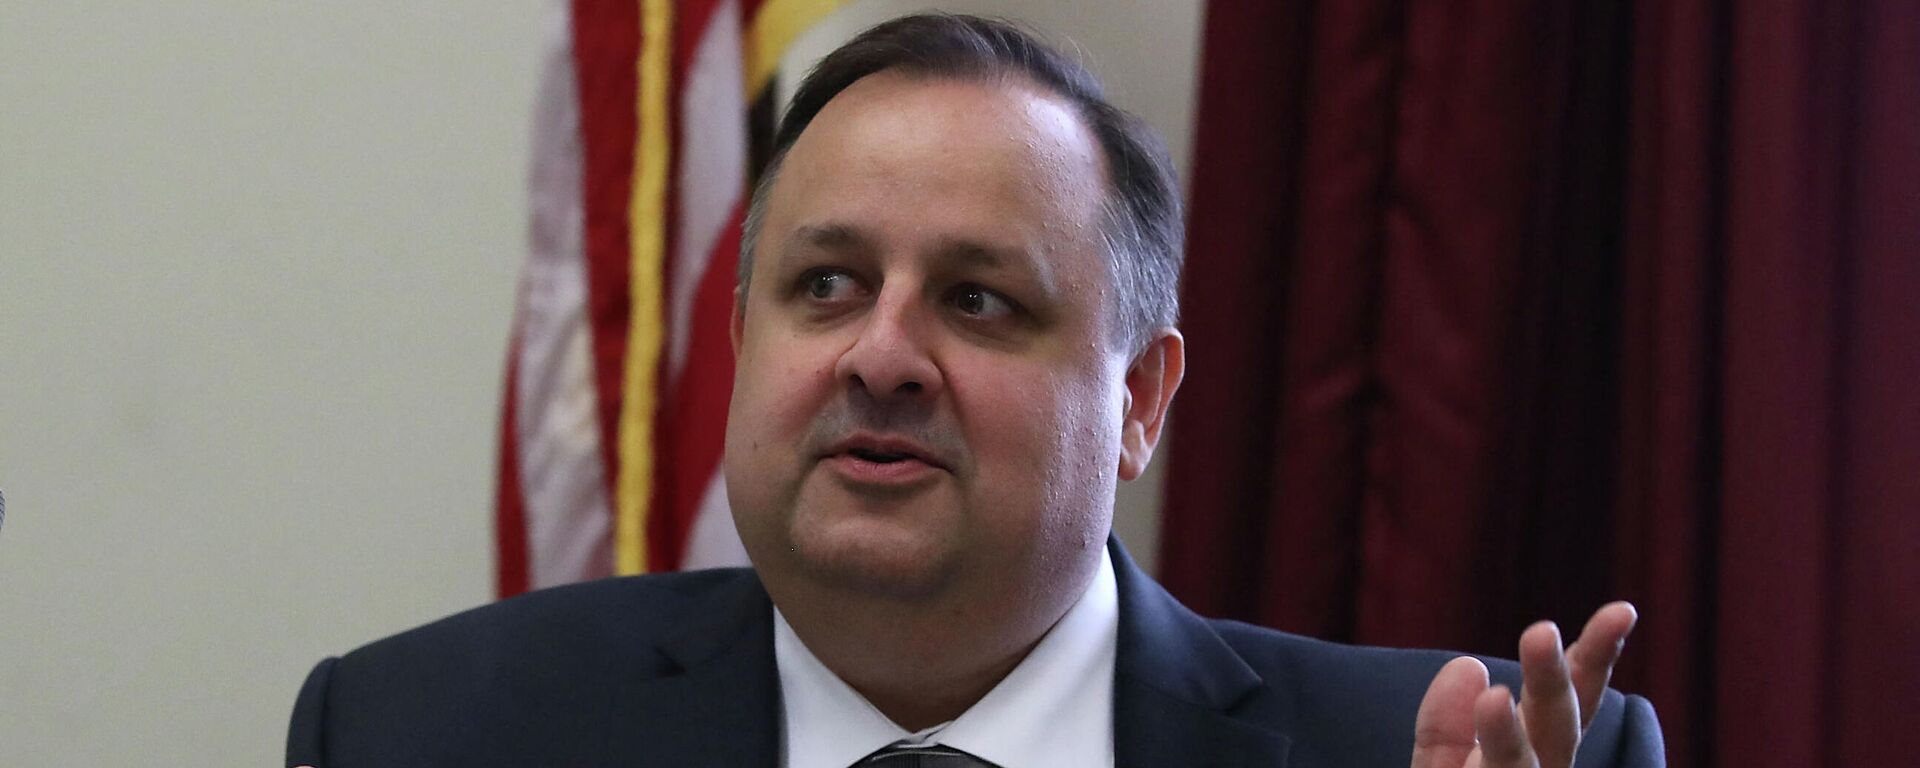 Walter Shaub, former director of the Office of Government Ethics, participates in a briefing on about President Trump's refusal to divest his businesses and the administration's delay in disclosing ethics waivers for appointees, on Capitol Hill November 1, 2017 in Washington, DC. - Sputnik International, 1920, 14.10.2021